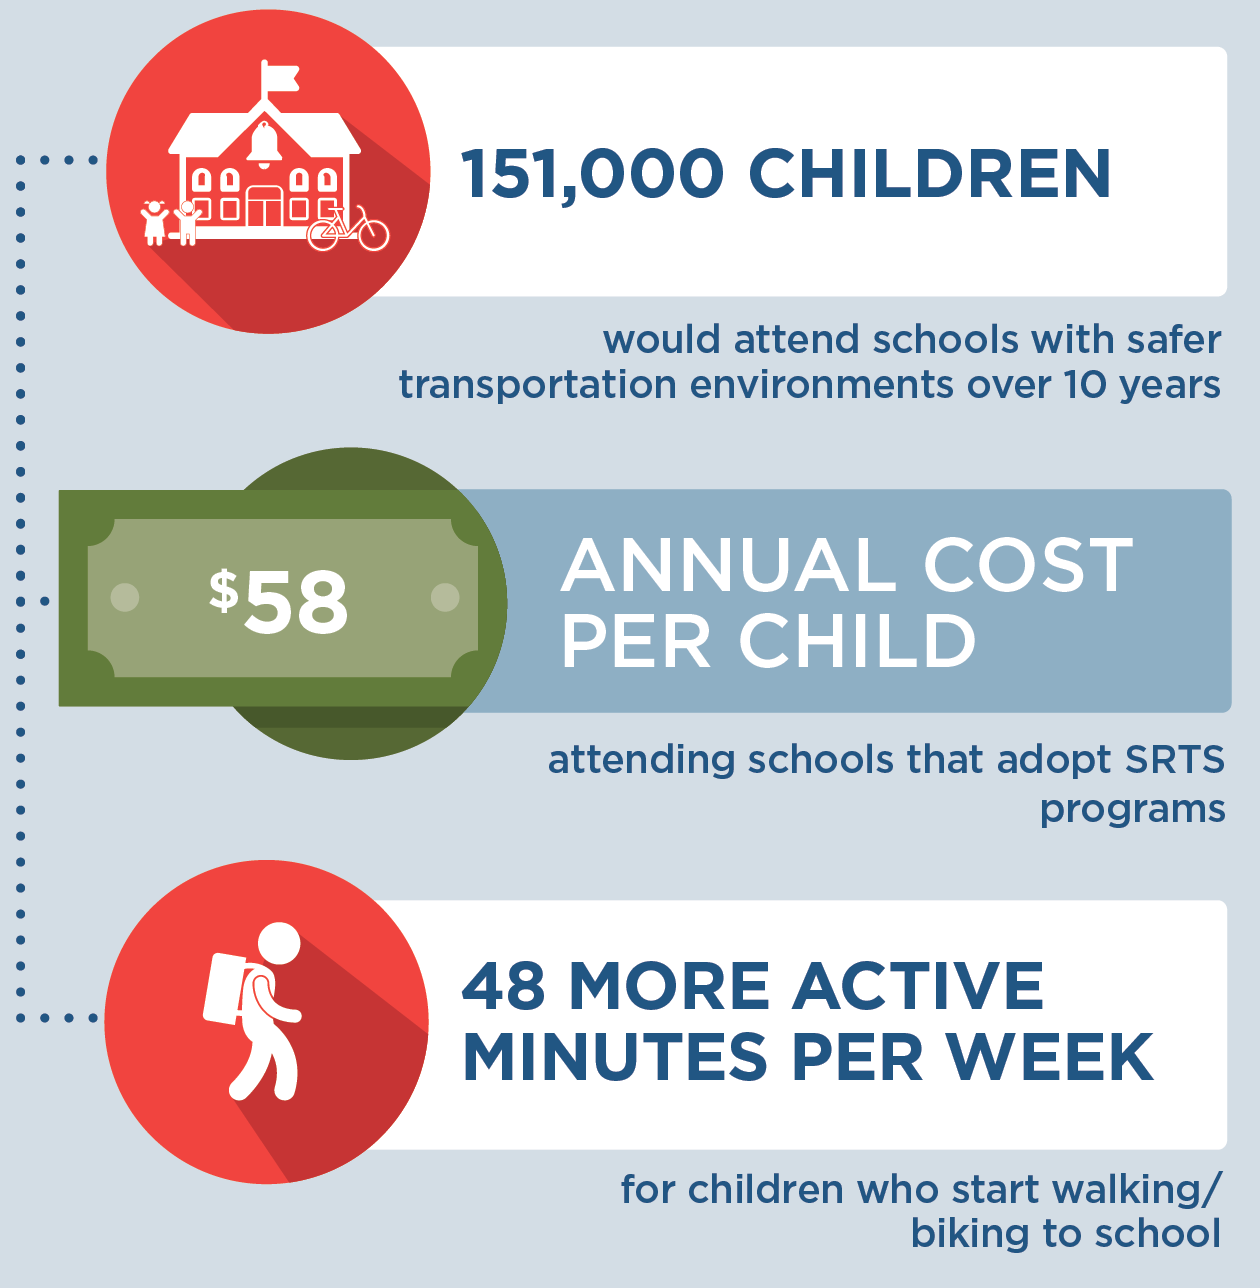 If Safe Routes to School was expanded in Wisconsin, then by the end of 2030, 151,000 children would attend schools with safer transportation environments, and children who start walking or biking to school would get 48 more active minutes per week. This program would cost $58 per child annually to implement, for those children attending schools that adopt Safe Routes to School programs.